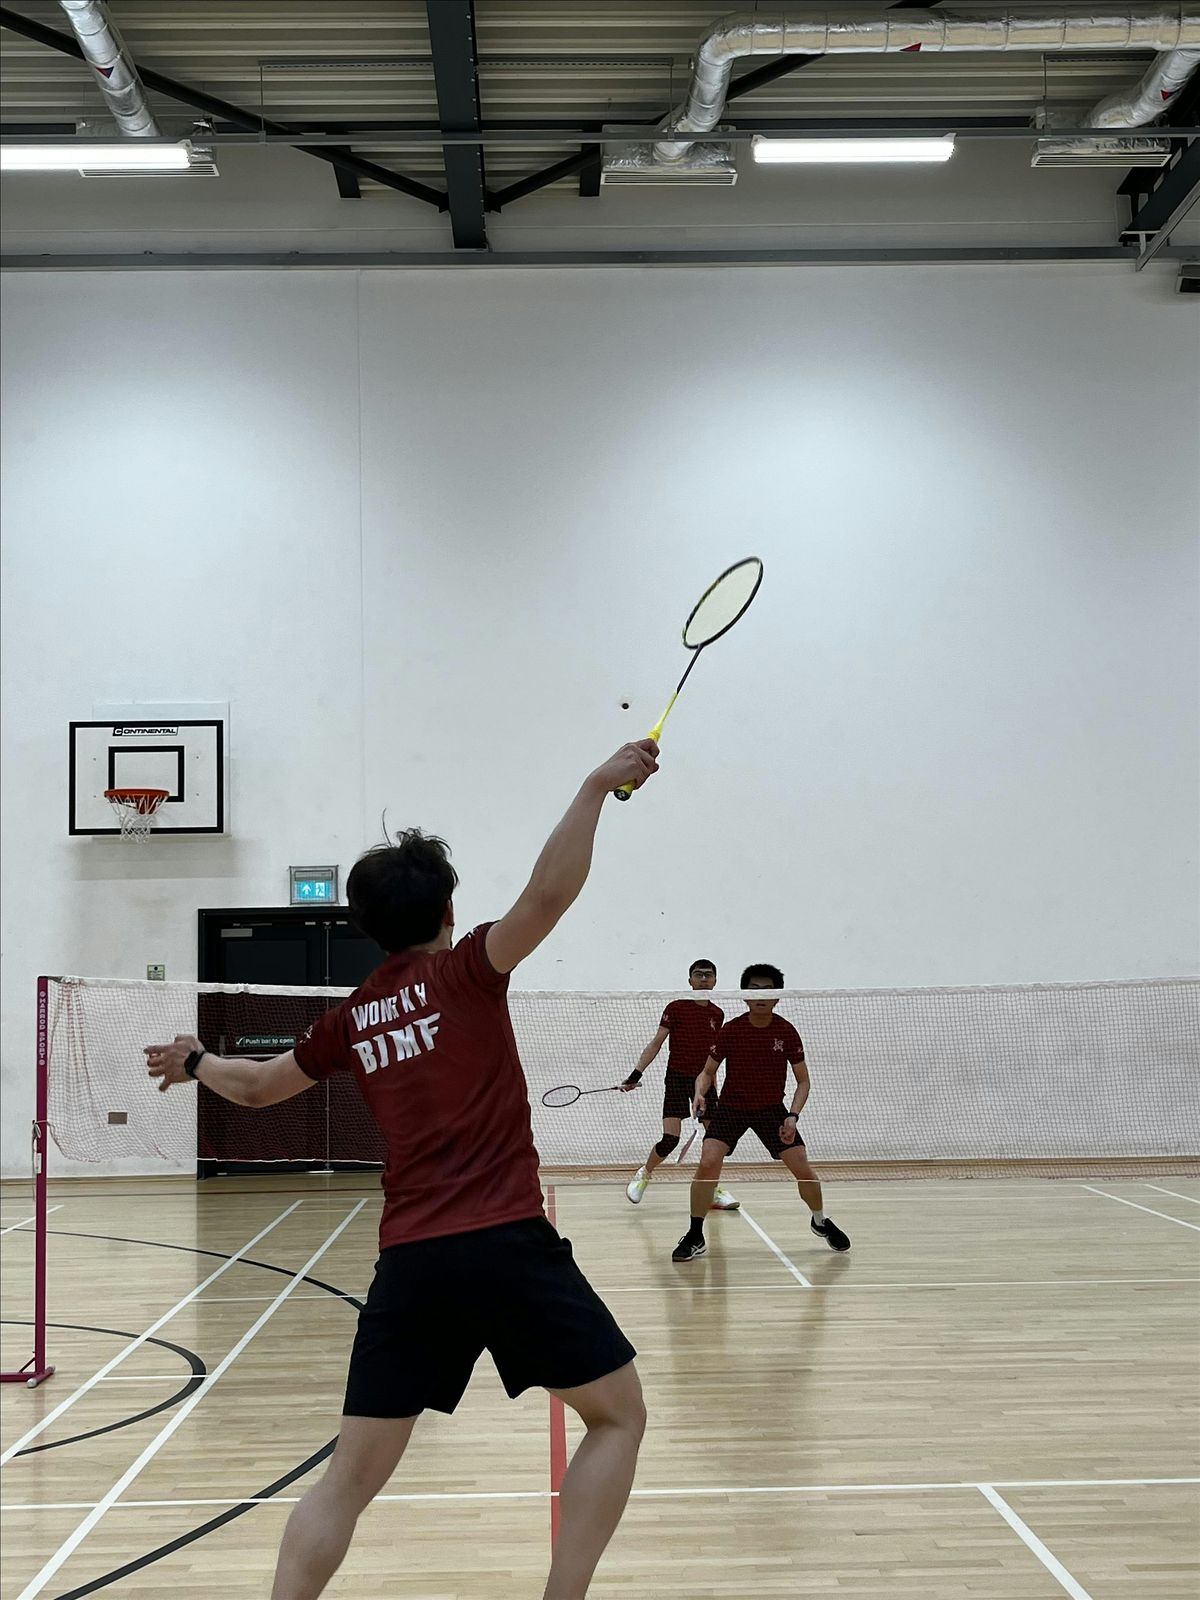 BJMF Badminton - Sunday session (lower intermediate and above)